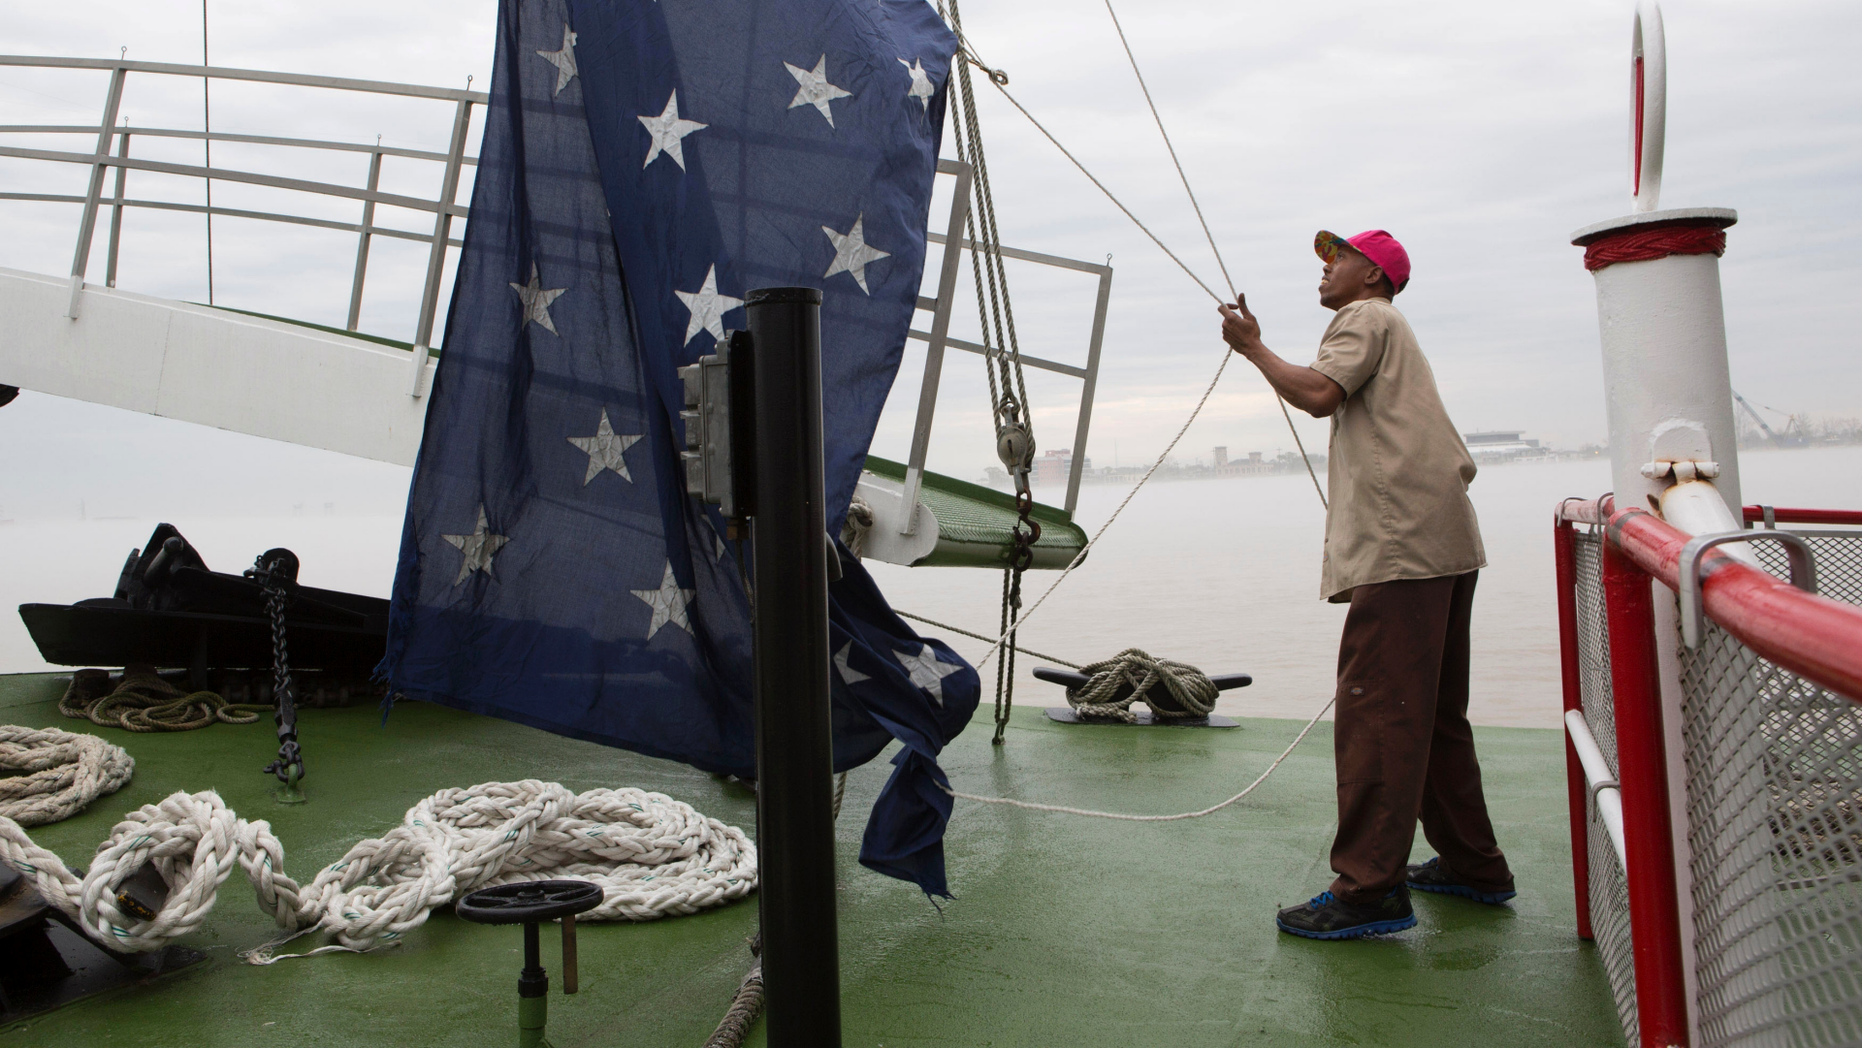 DOSSIER - In this archival photo of March 15, 2015, Dwayne McCornick, a deckhand on the Natchez steamship for 16 years, raises the Union Jack naval flag on the Mississippi River to Nova Scotia. Orleans. After nearly 17 years, US Navy warships will regain control of the Union Jack, replacing the first navy ship sent as a result of the September 11 attacks.
Chief of Naval Operations Admiral John Richardson issued an order on Thursday, February 21, 2019, requesting that the blue banner with 50 white stars return on June 4 to commemorate the Battle of Midway from the Second World War. The current maritime flag, the First Navy Jack, had red and white bands with a rattlesnake and the words "Do not walk on me". (AP Photo / Samantha Kaplan, File)